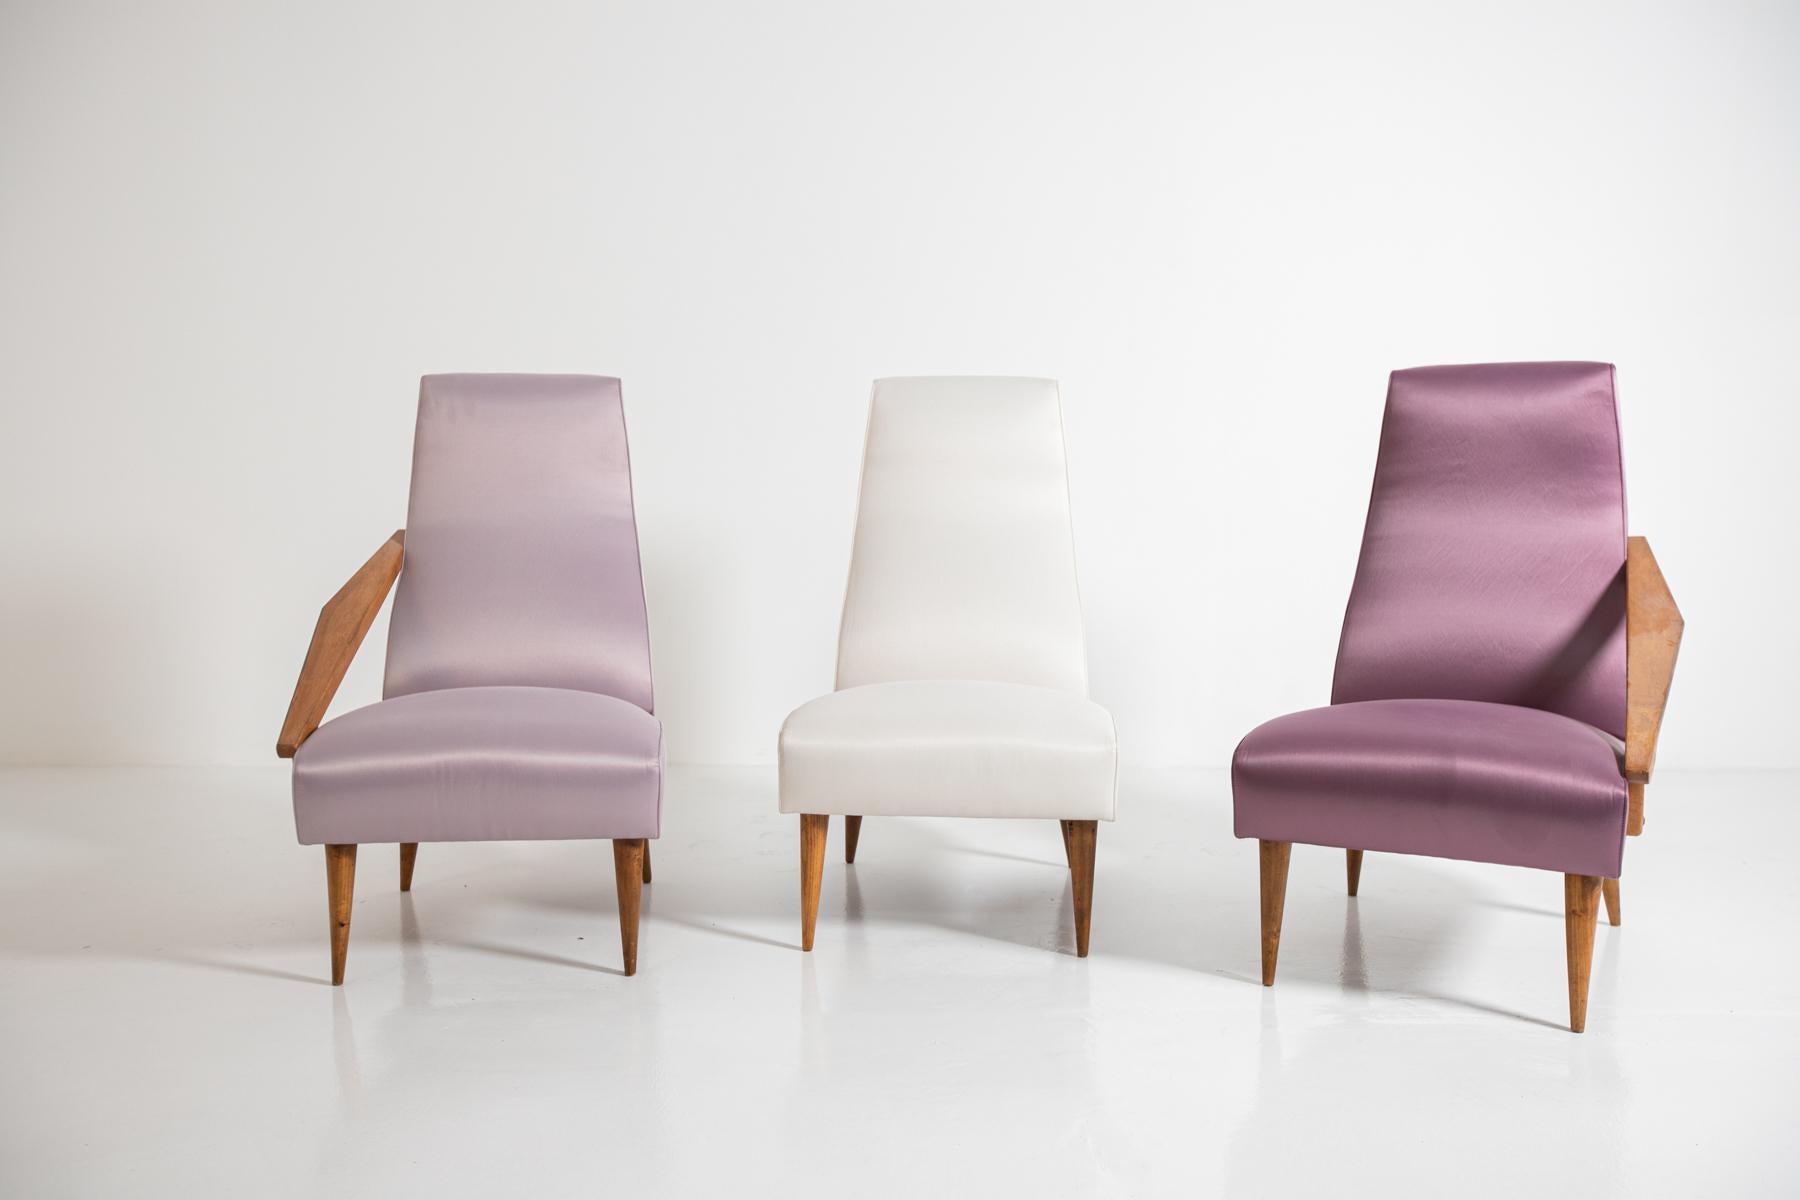 Rare set of three armchairs attributed to Gio Ponti for the Boucher and Fils Edition manufactory in the 1950s.
The set is made with an ash wood frame. Its upholstery is in an elegant silk fabric of different colors, but in a pleasant way where the